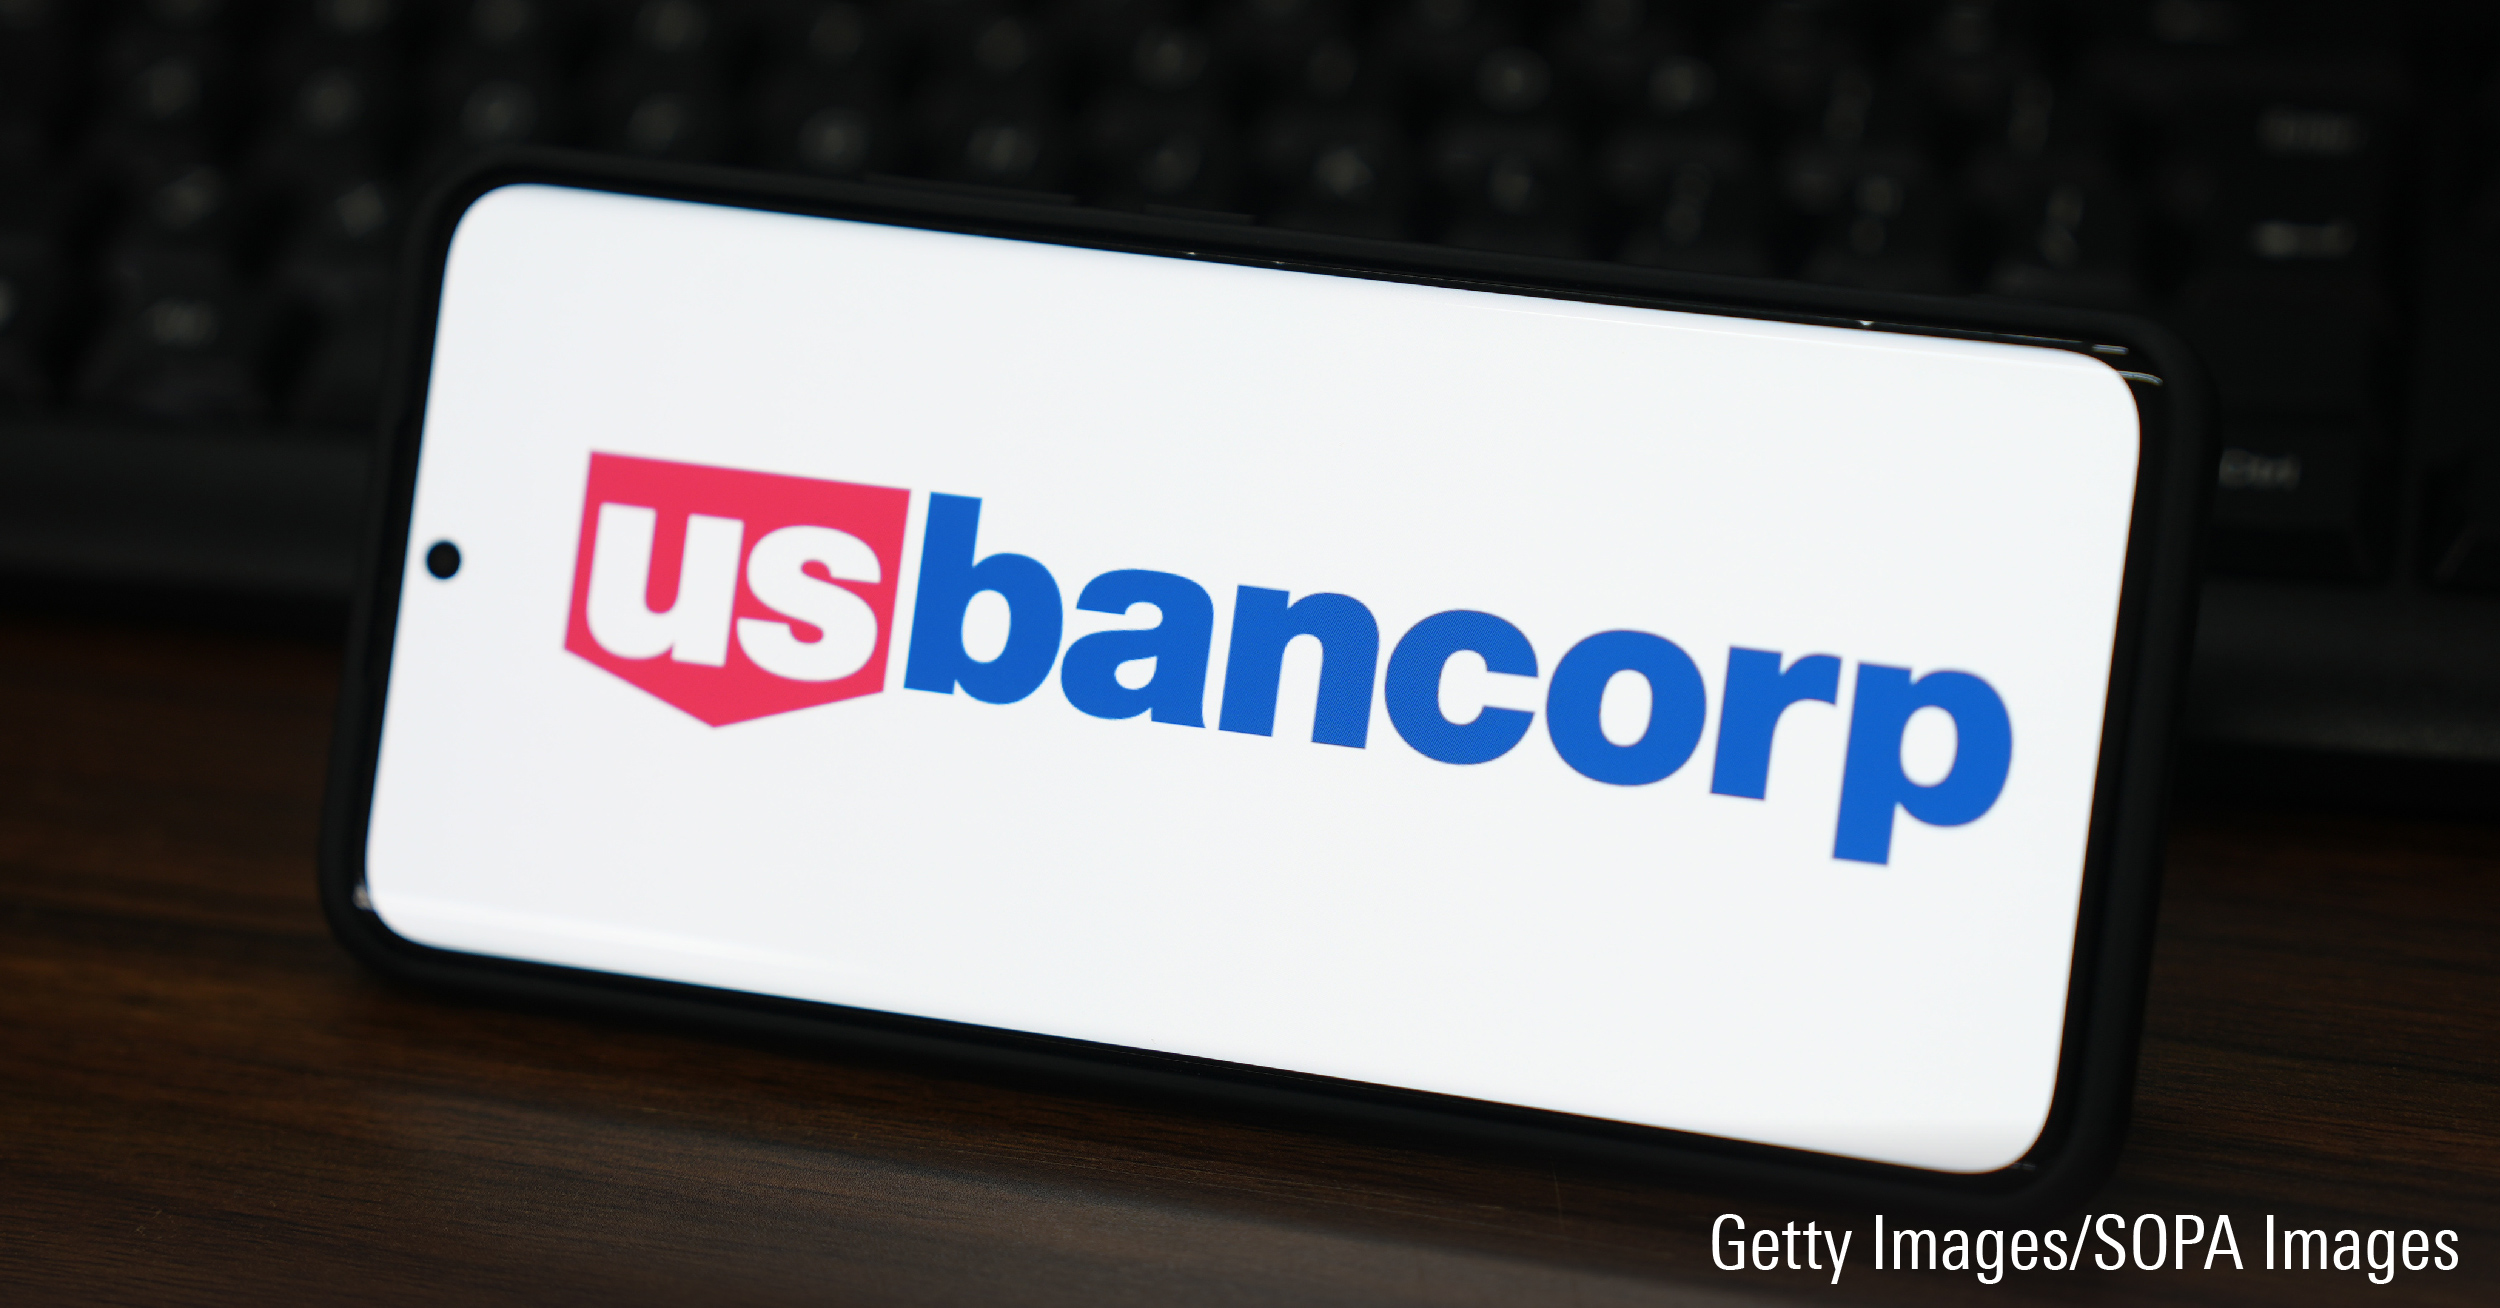 In this photo illustration, the U.S. Bancorp logo is displayed on the screen of a smartphone.